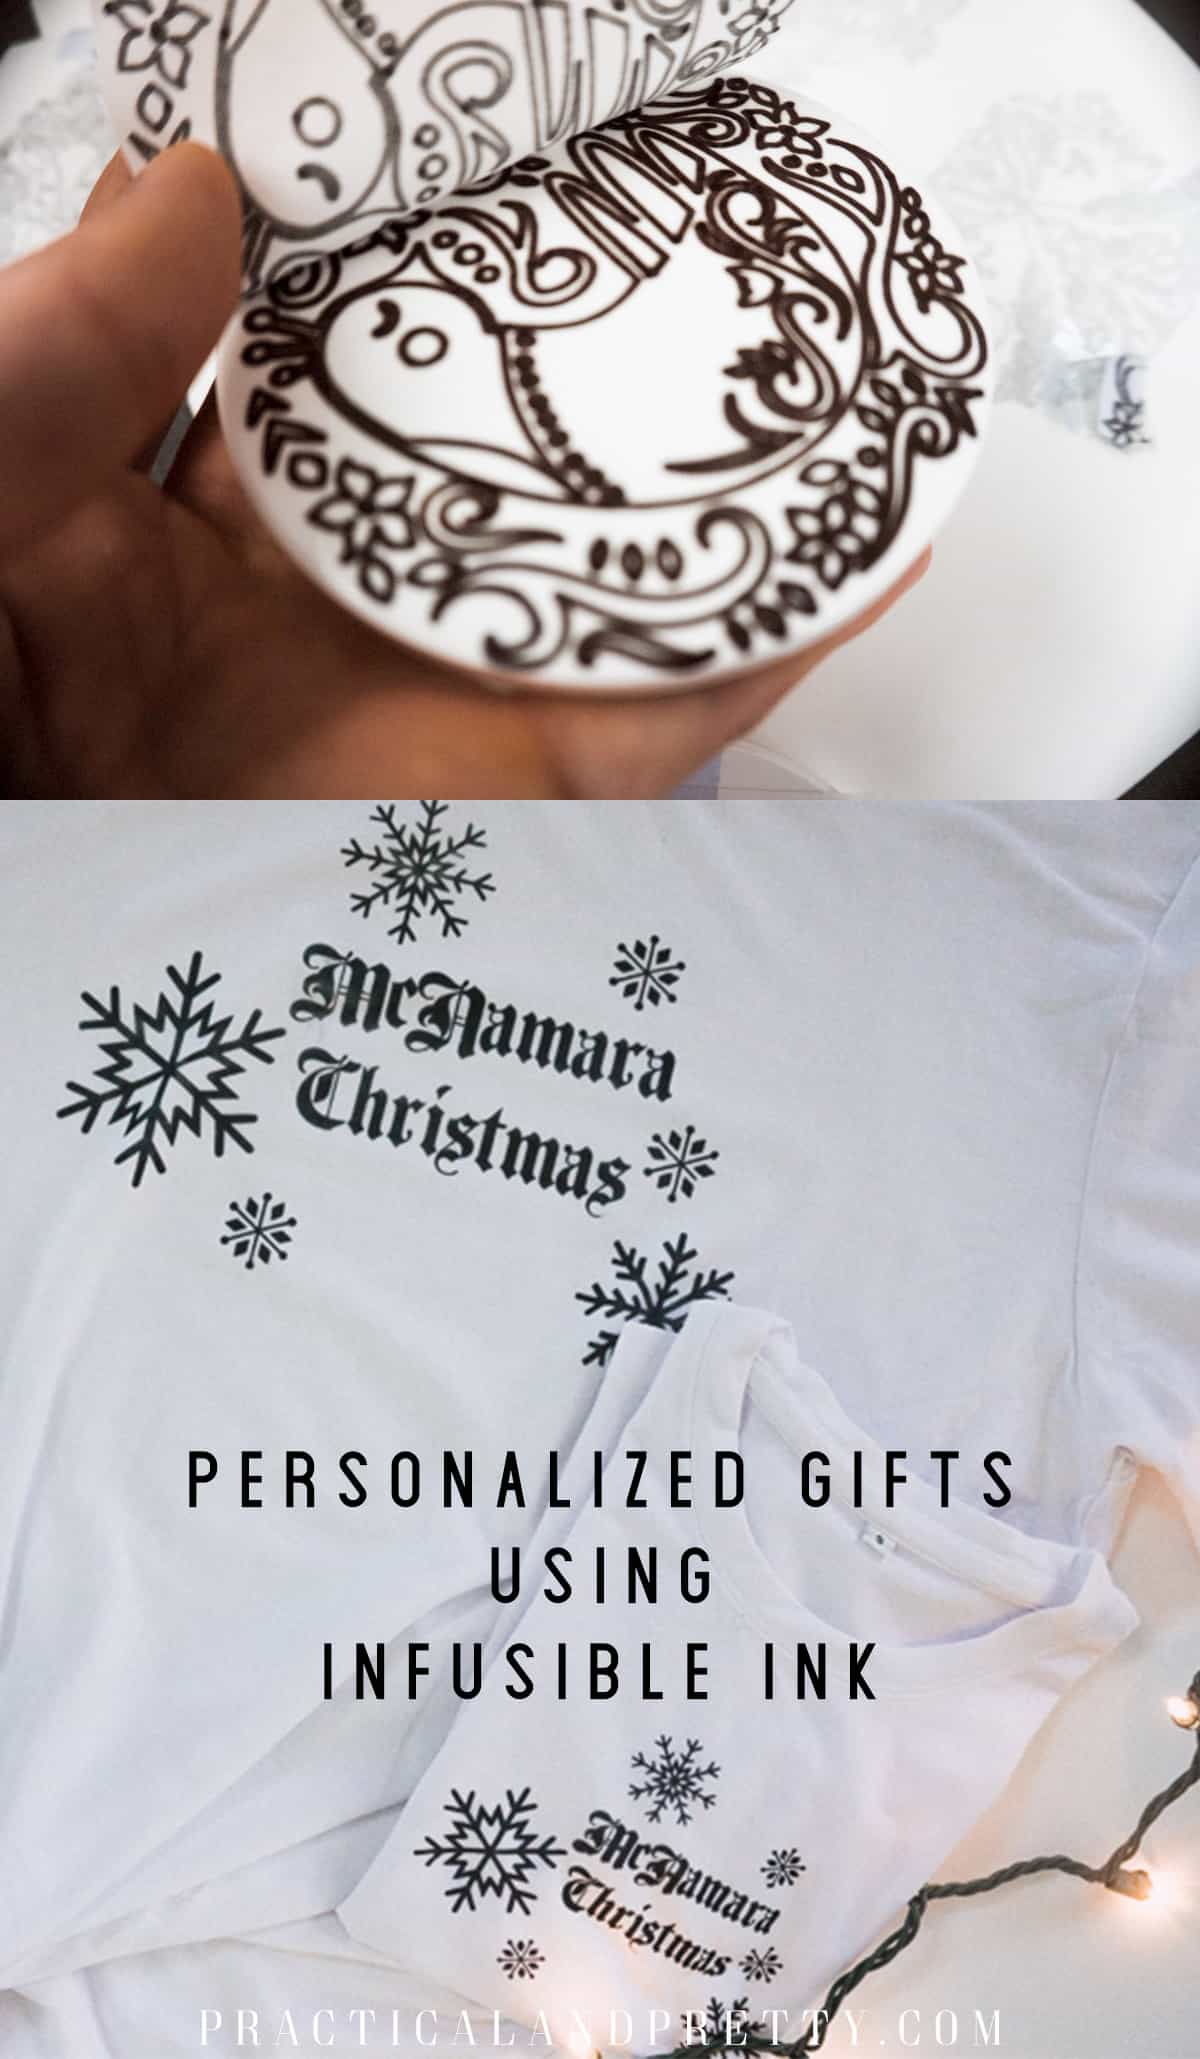 Personalize your Christmas this year or whatever gift giving season you're celebrating with some personalized gift ideas.